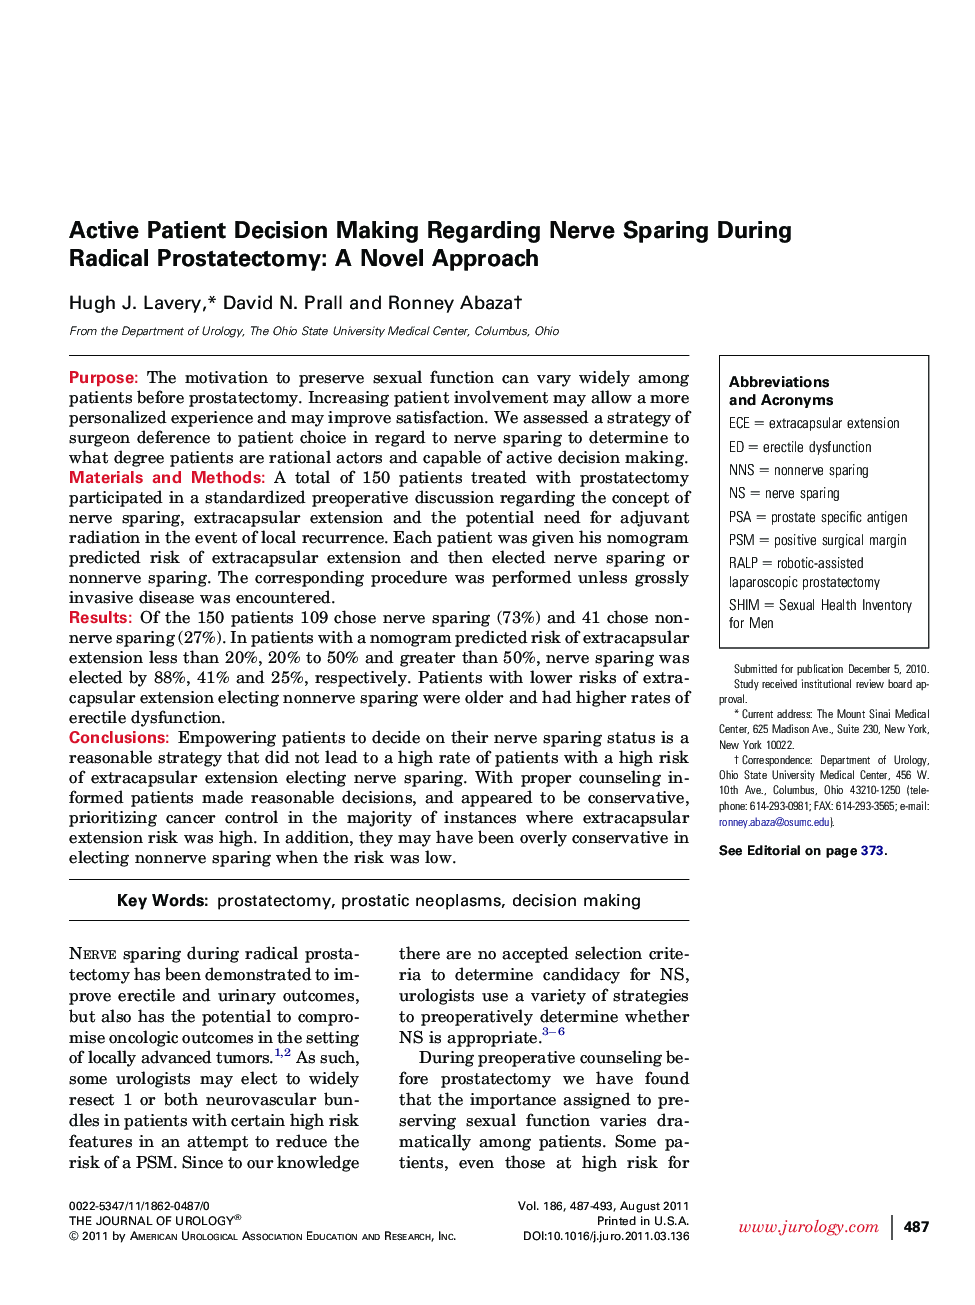 Active Patient Decision Making Regarding Nerve Sparing During Radical Prostatectomy: A Novel Approach